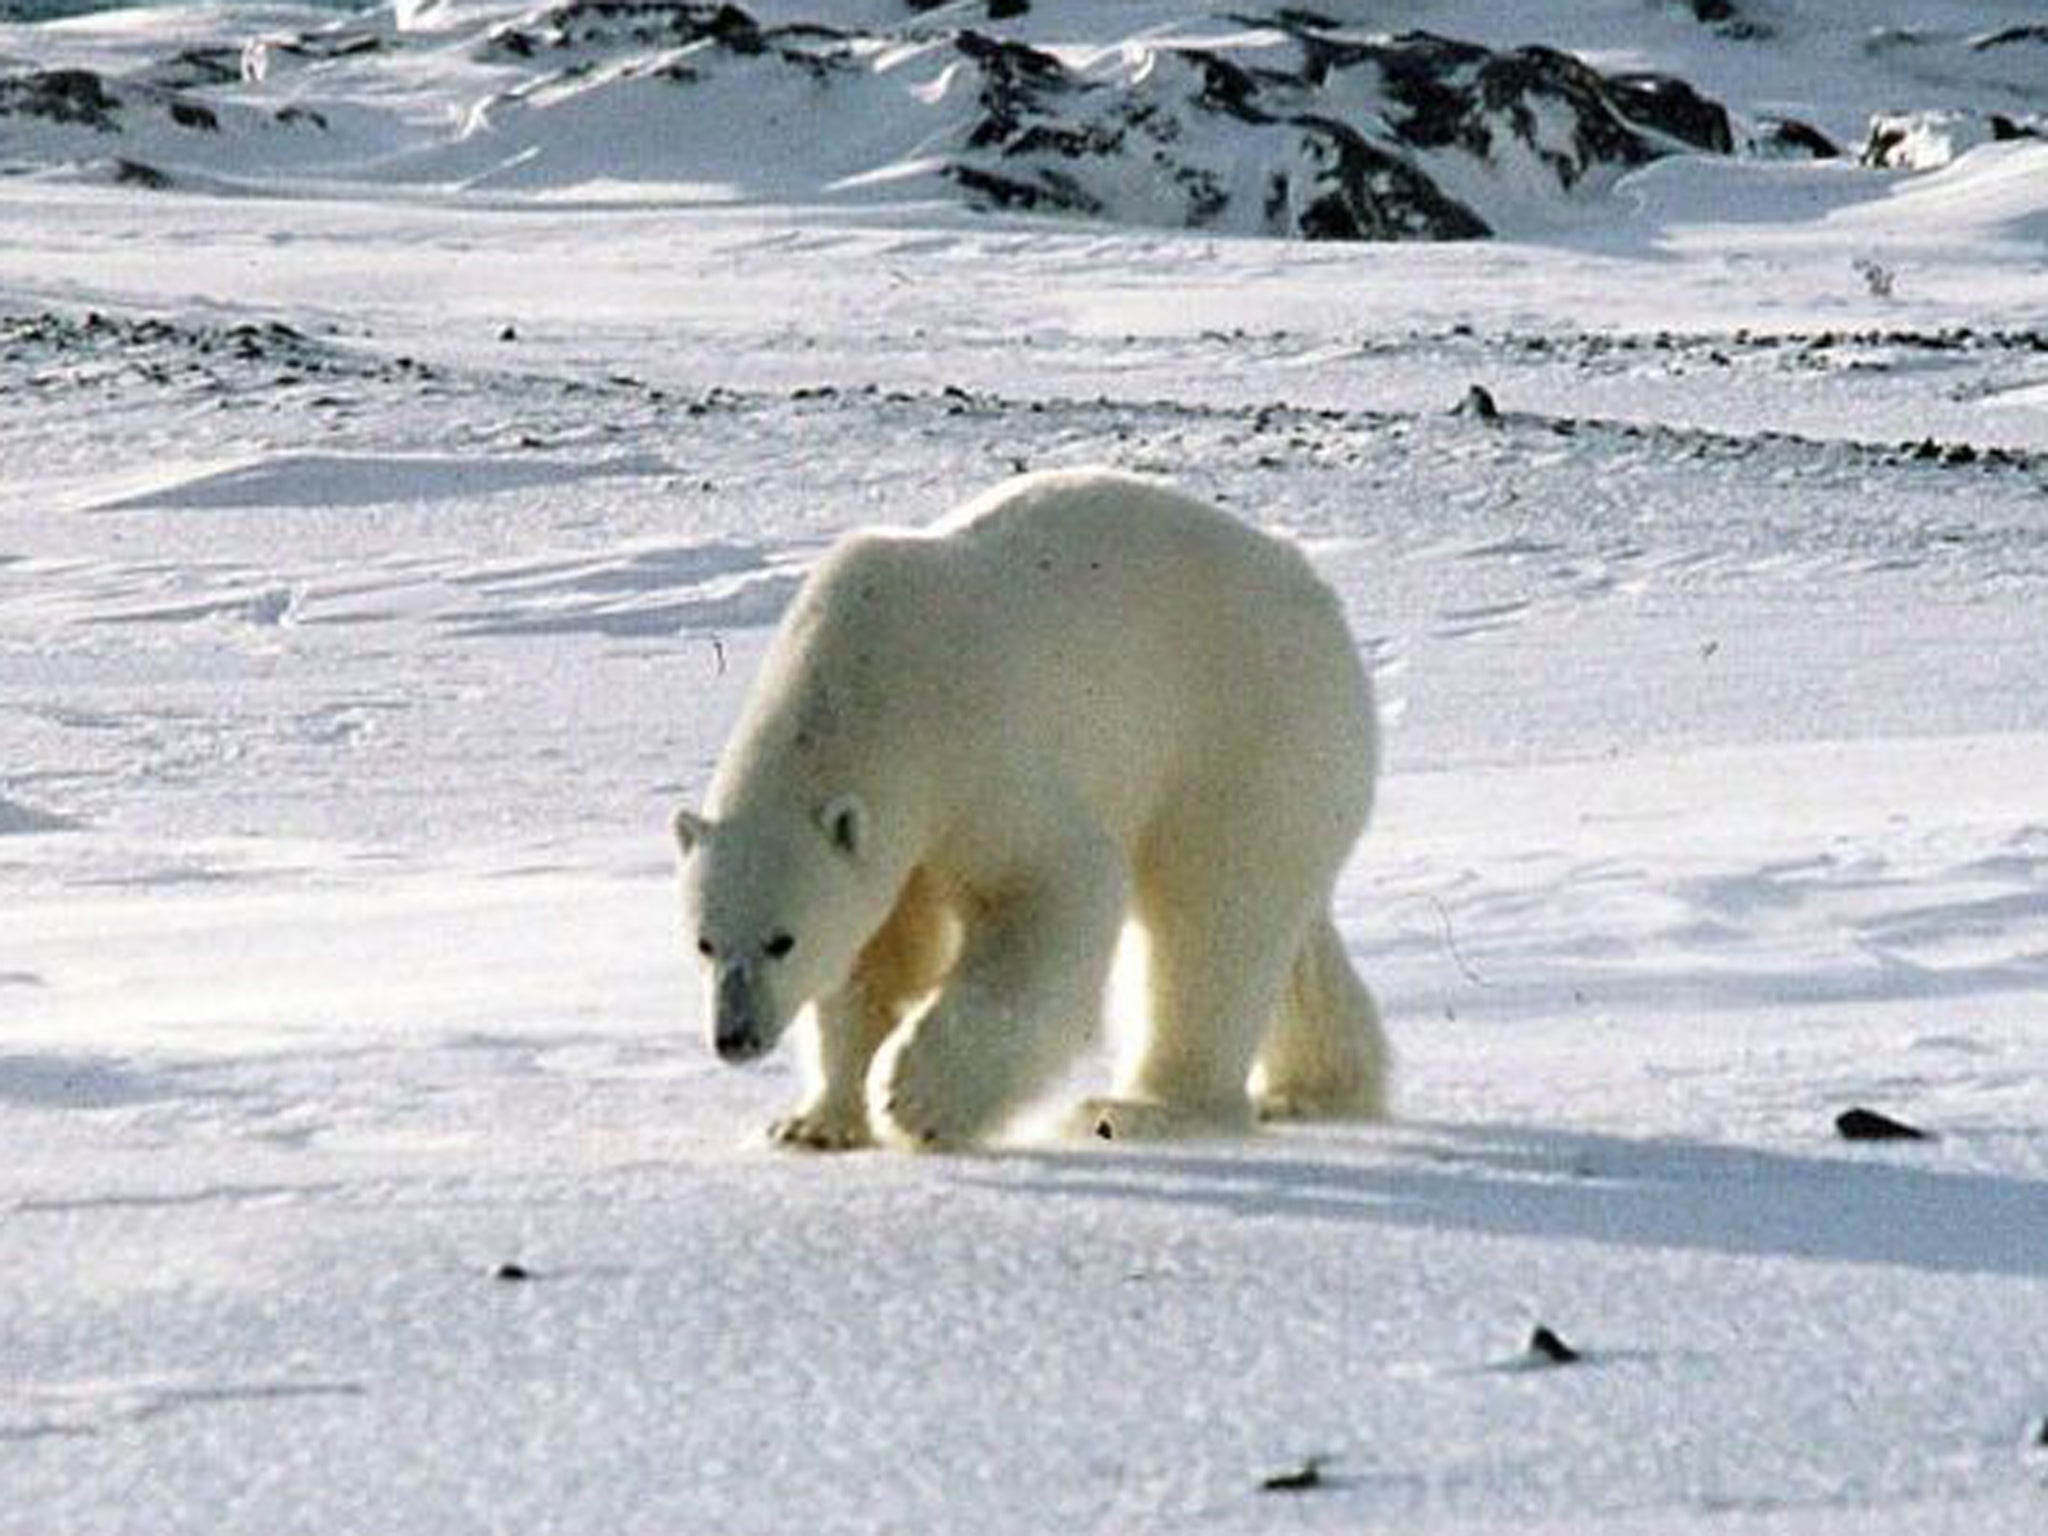 A polar bear roams on the remote Svalbard archipelago between Norway's northern tip and the North Pole